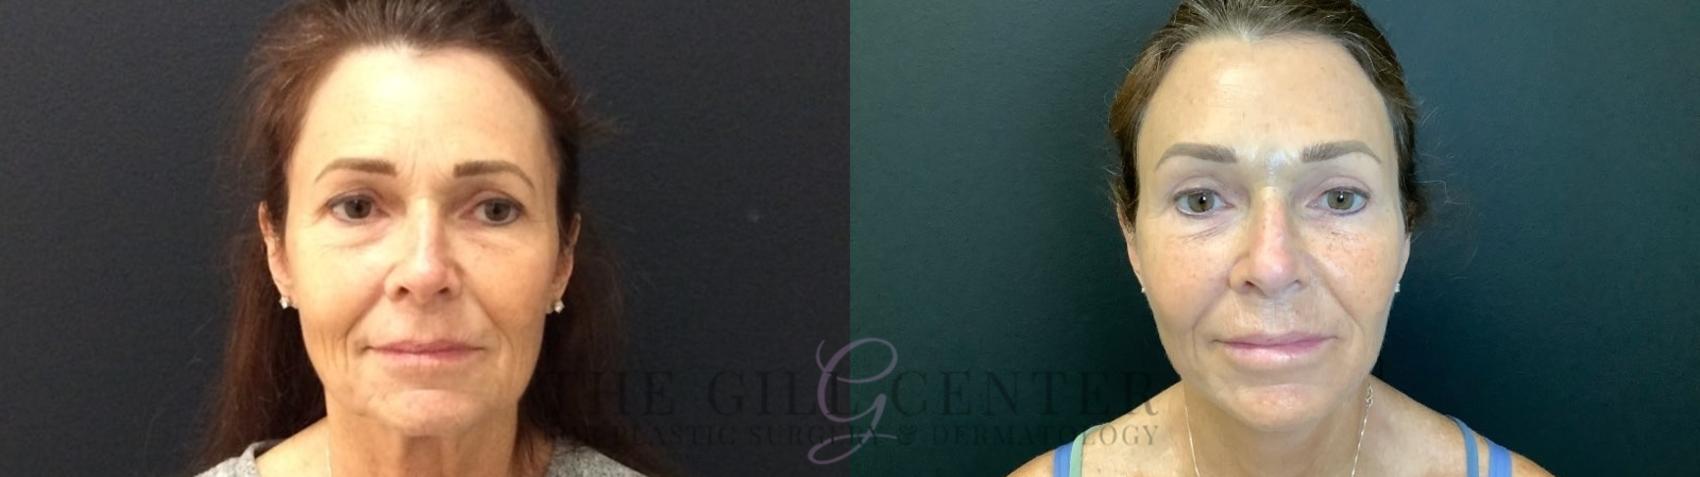 Face & Neck Lift Case 439 Before & After Front | The Woodlands, TX | The Gill Center for Plastic Surgery and Dermatology